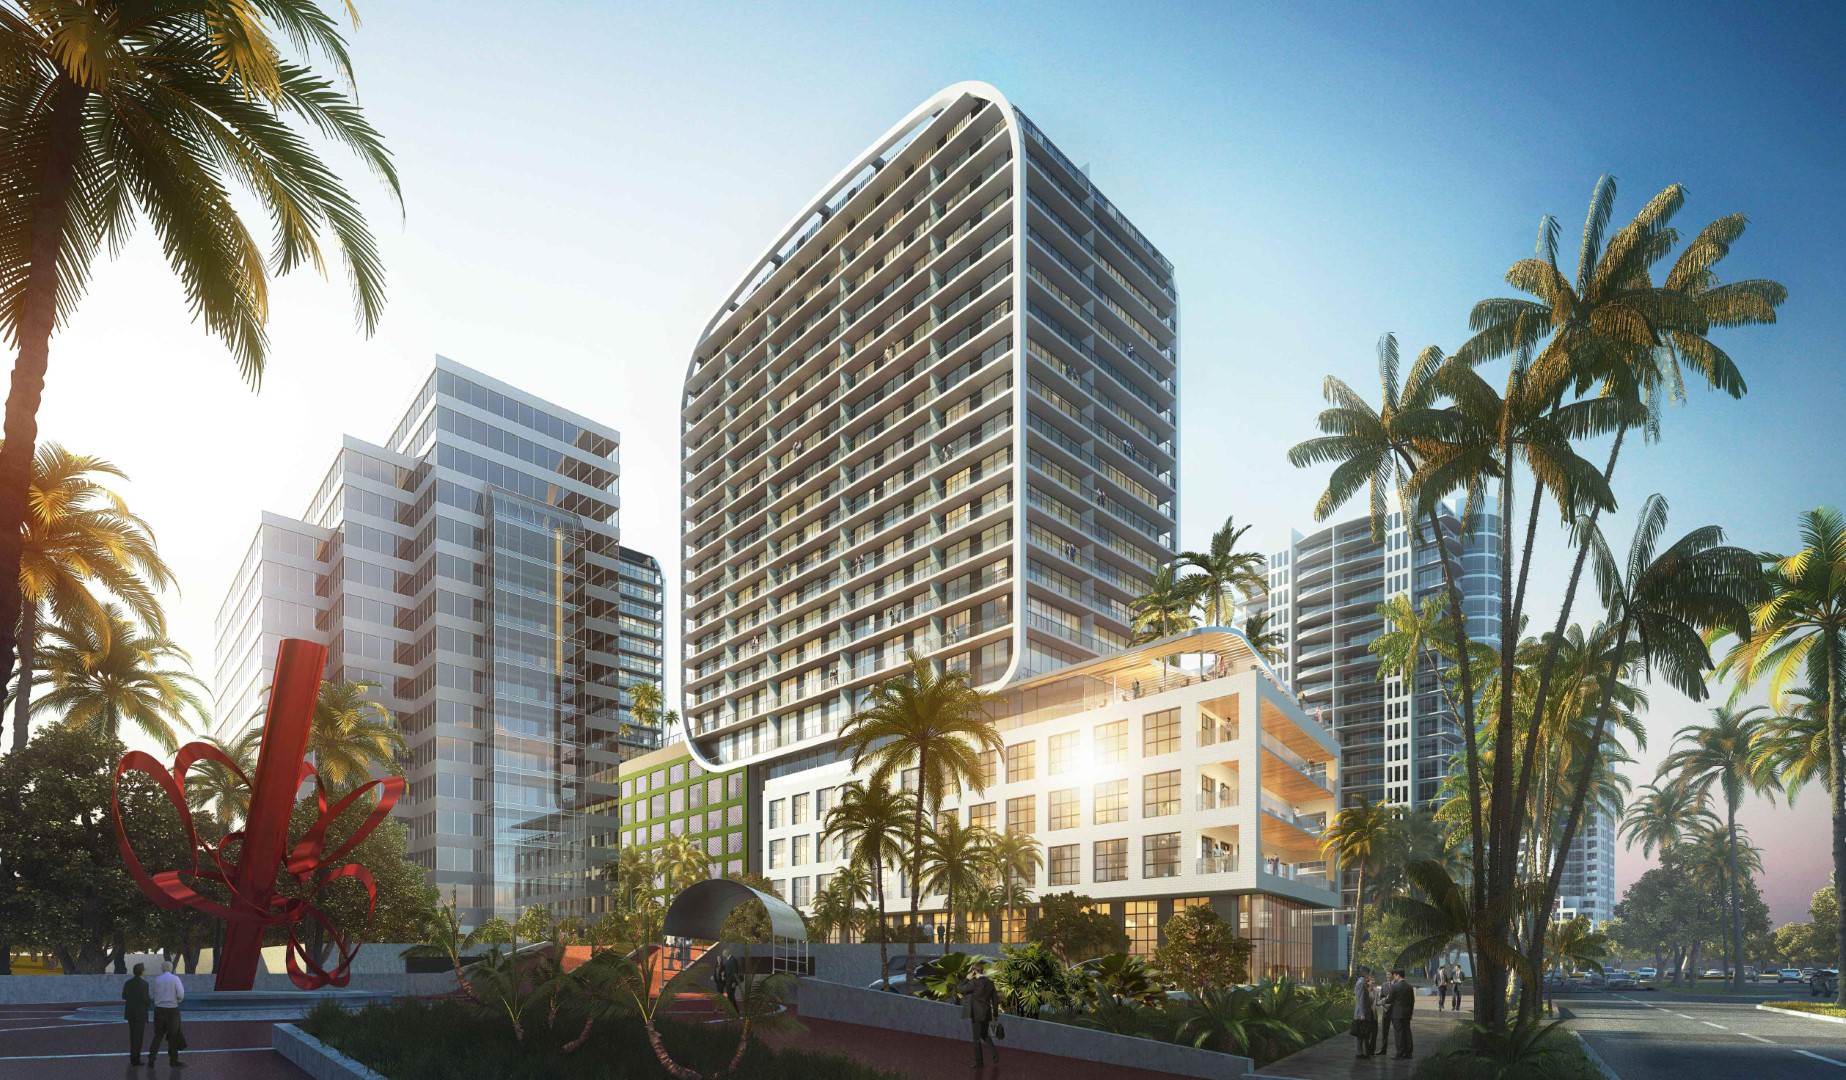 New Terra Group’s Luxury Project in Coconut Grove Gets $185m in Construction Loan